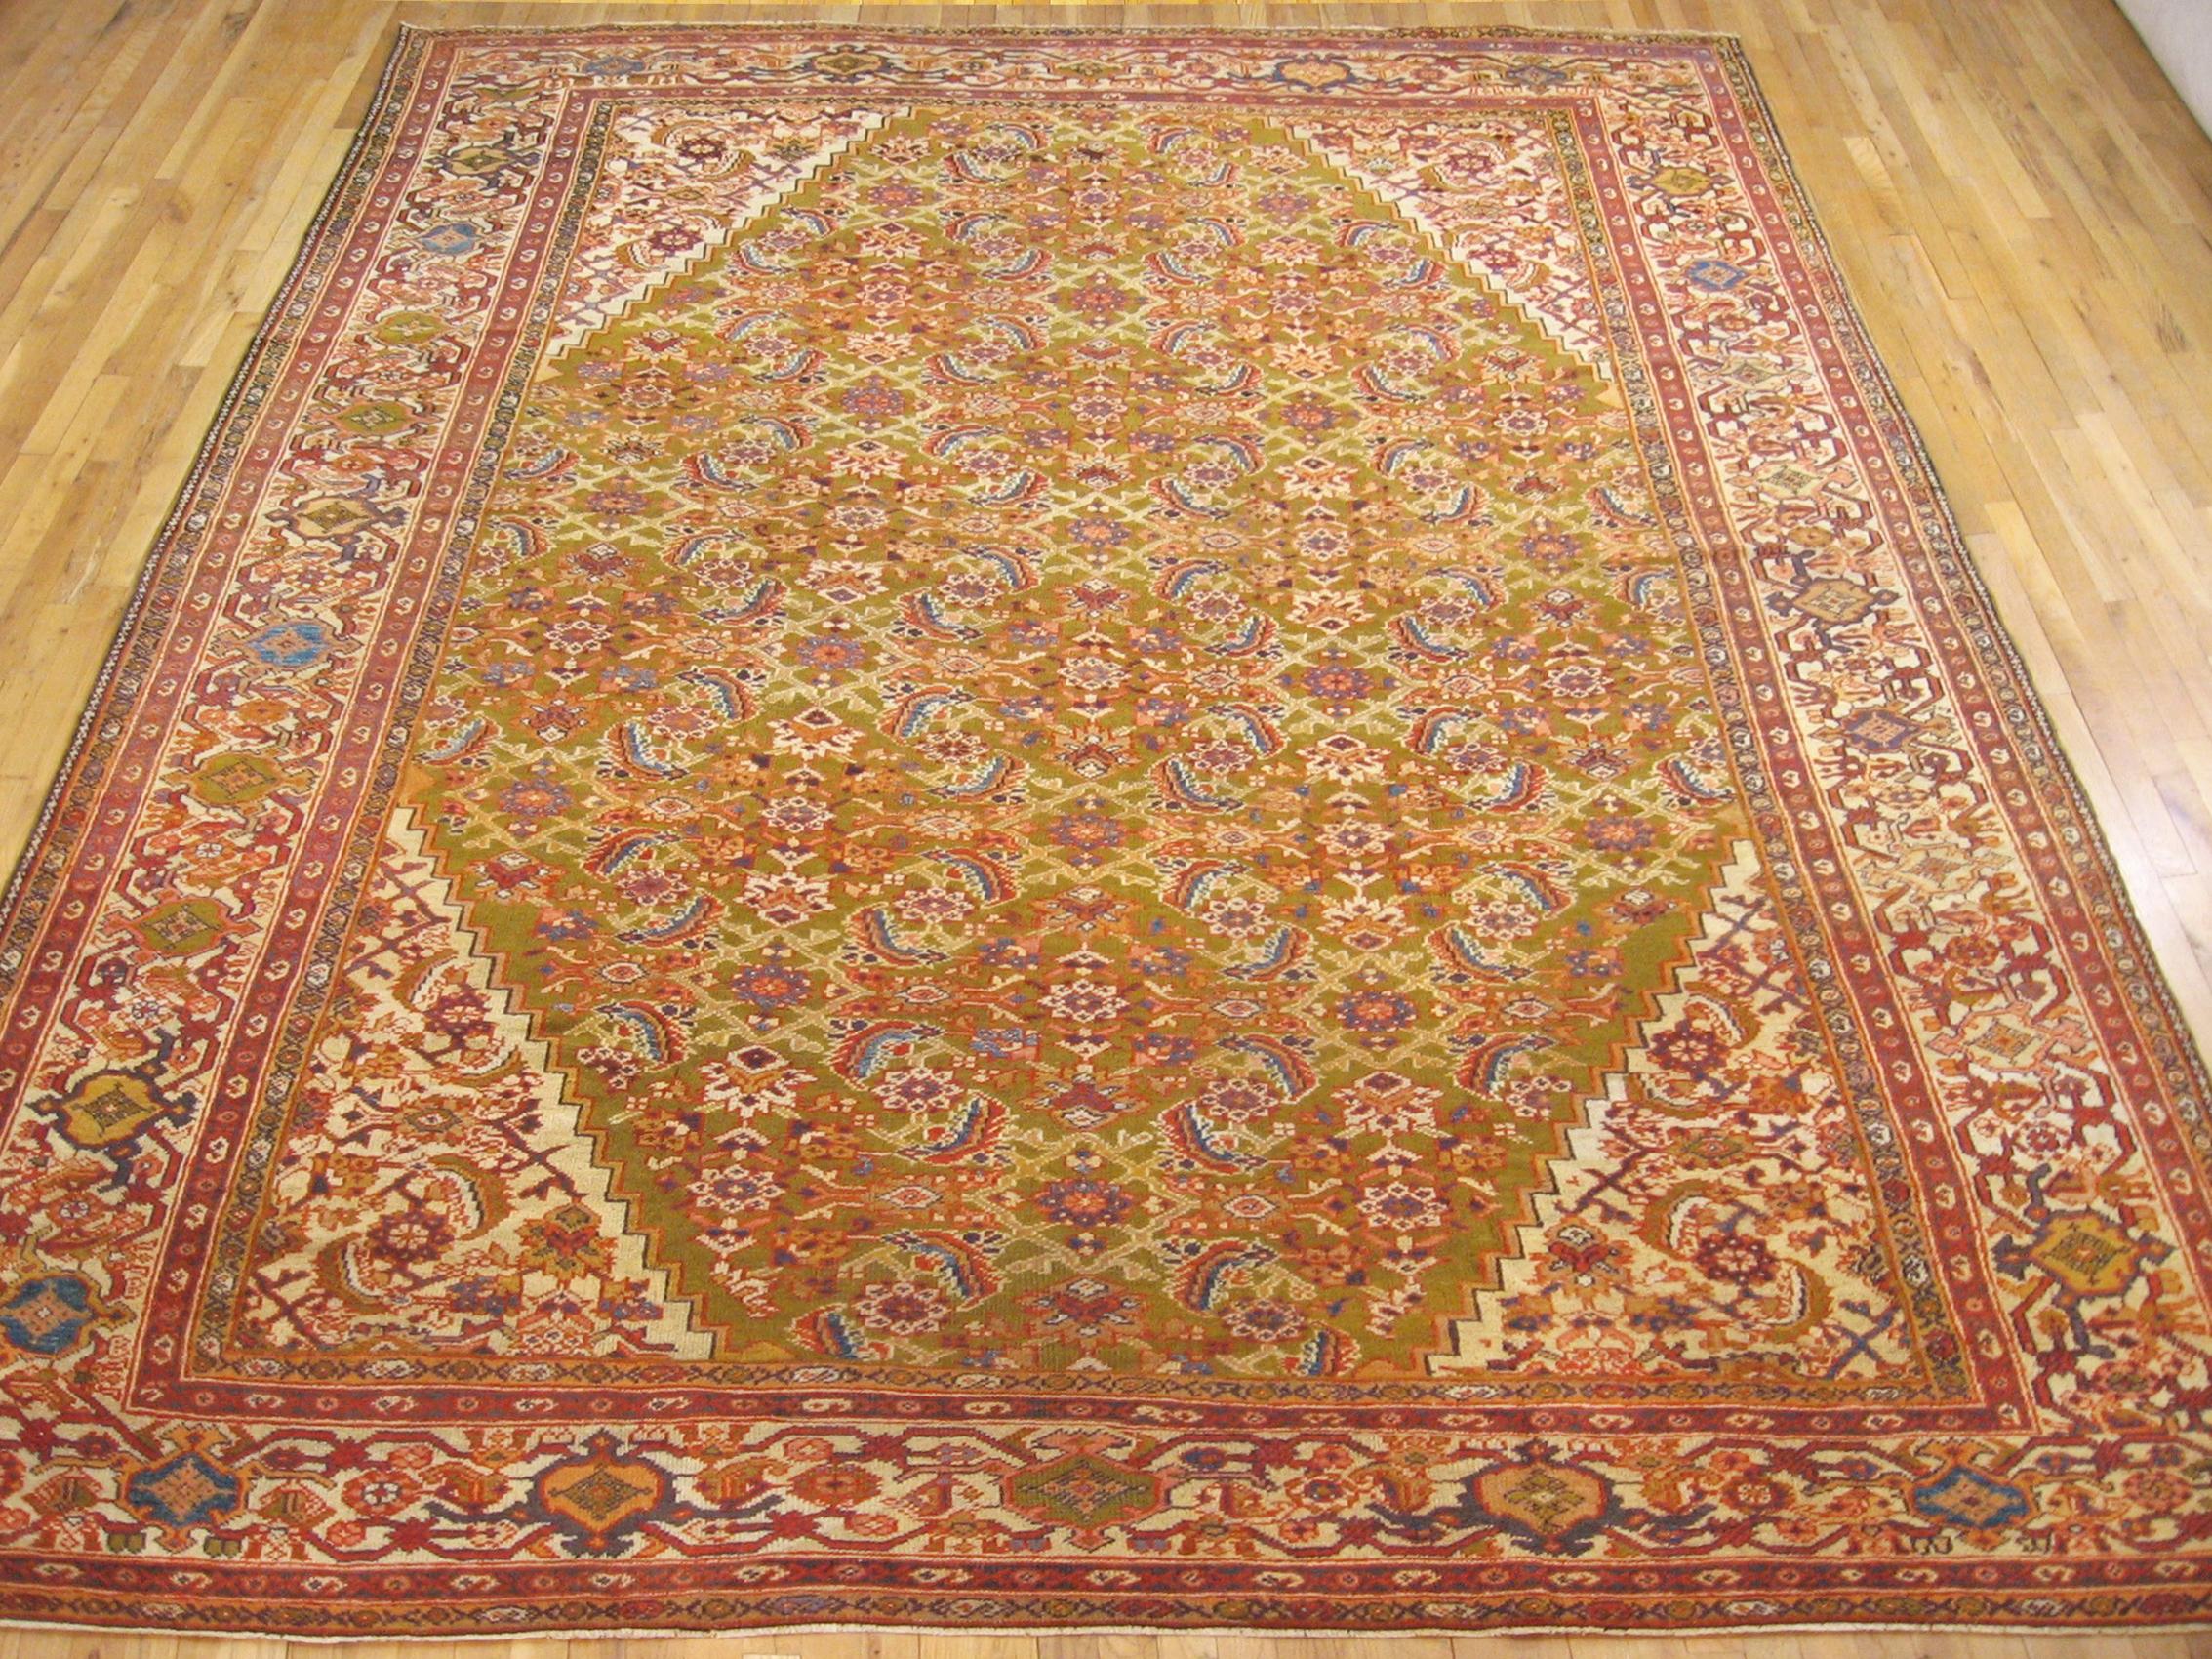 Antique Persian Sultanabad rug, room size, circa 1910.

A one-of-a-kind antique Persian Sultanabad oriental carpet with a thick and lustrous wool pile, knotted by hand, with soft touch and great resistance to wear. This lovely carpet features an